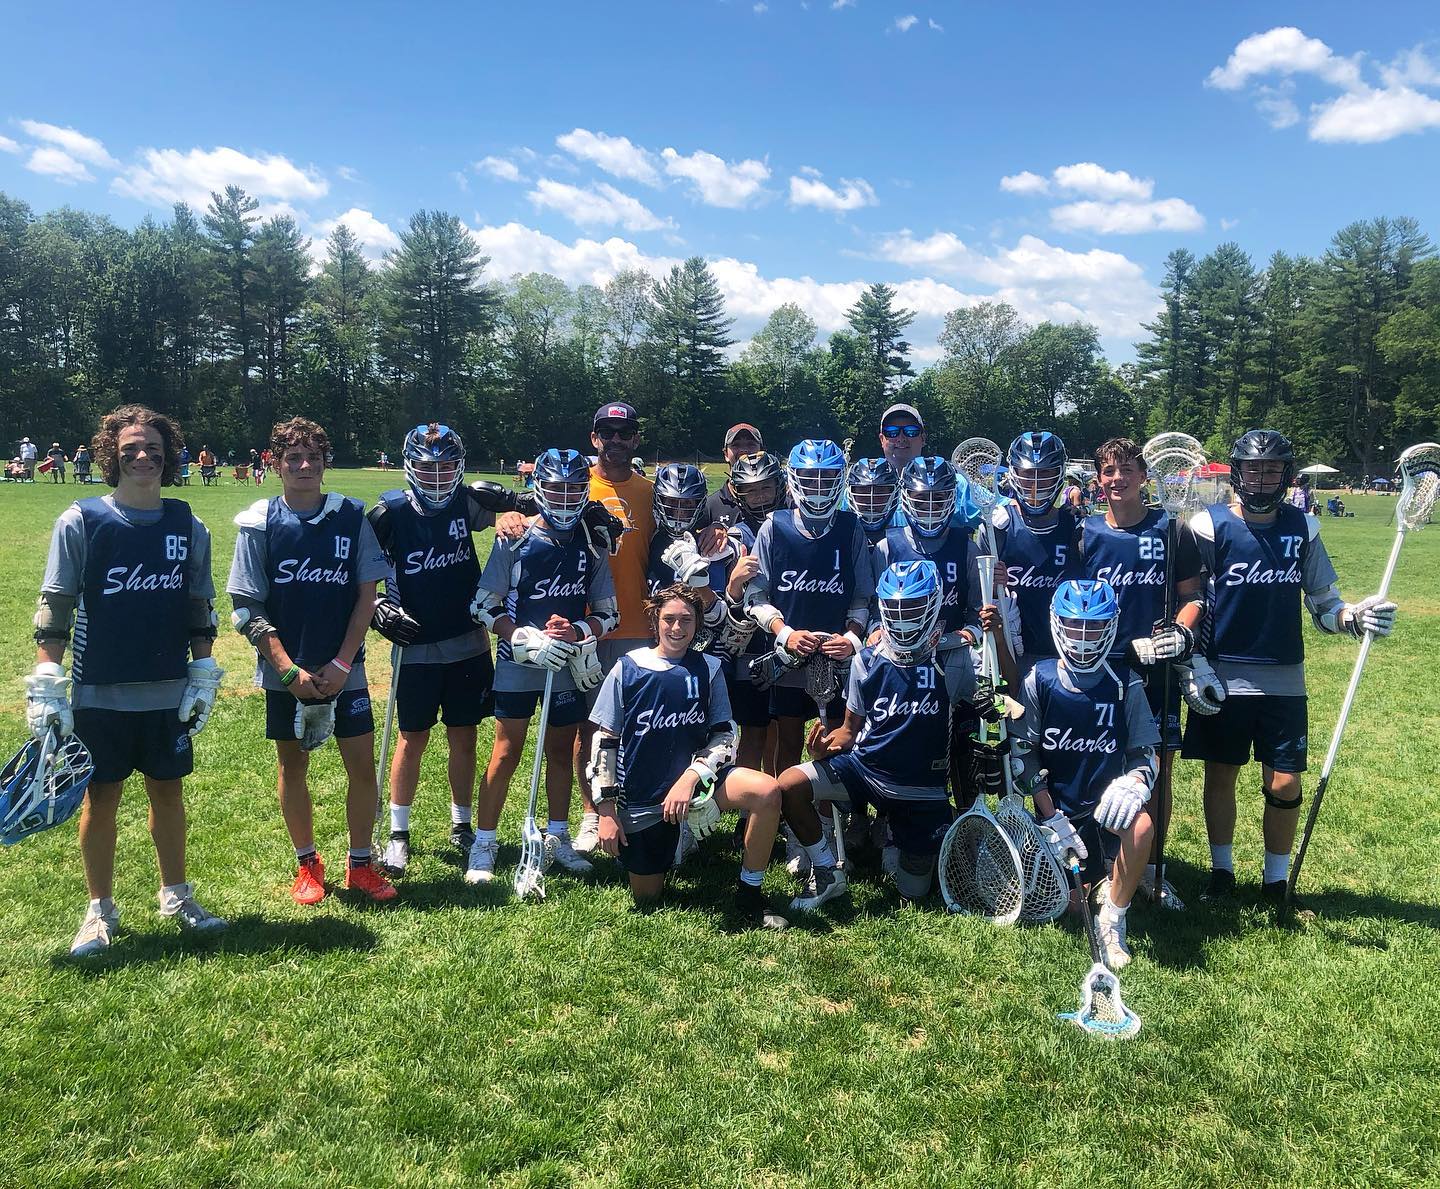 Our 2026 boys competed against the World Lacrosse Foundation today at Saratoga - special thanks to Casey Powell for speaking to the team after the game!